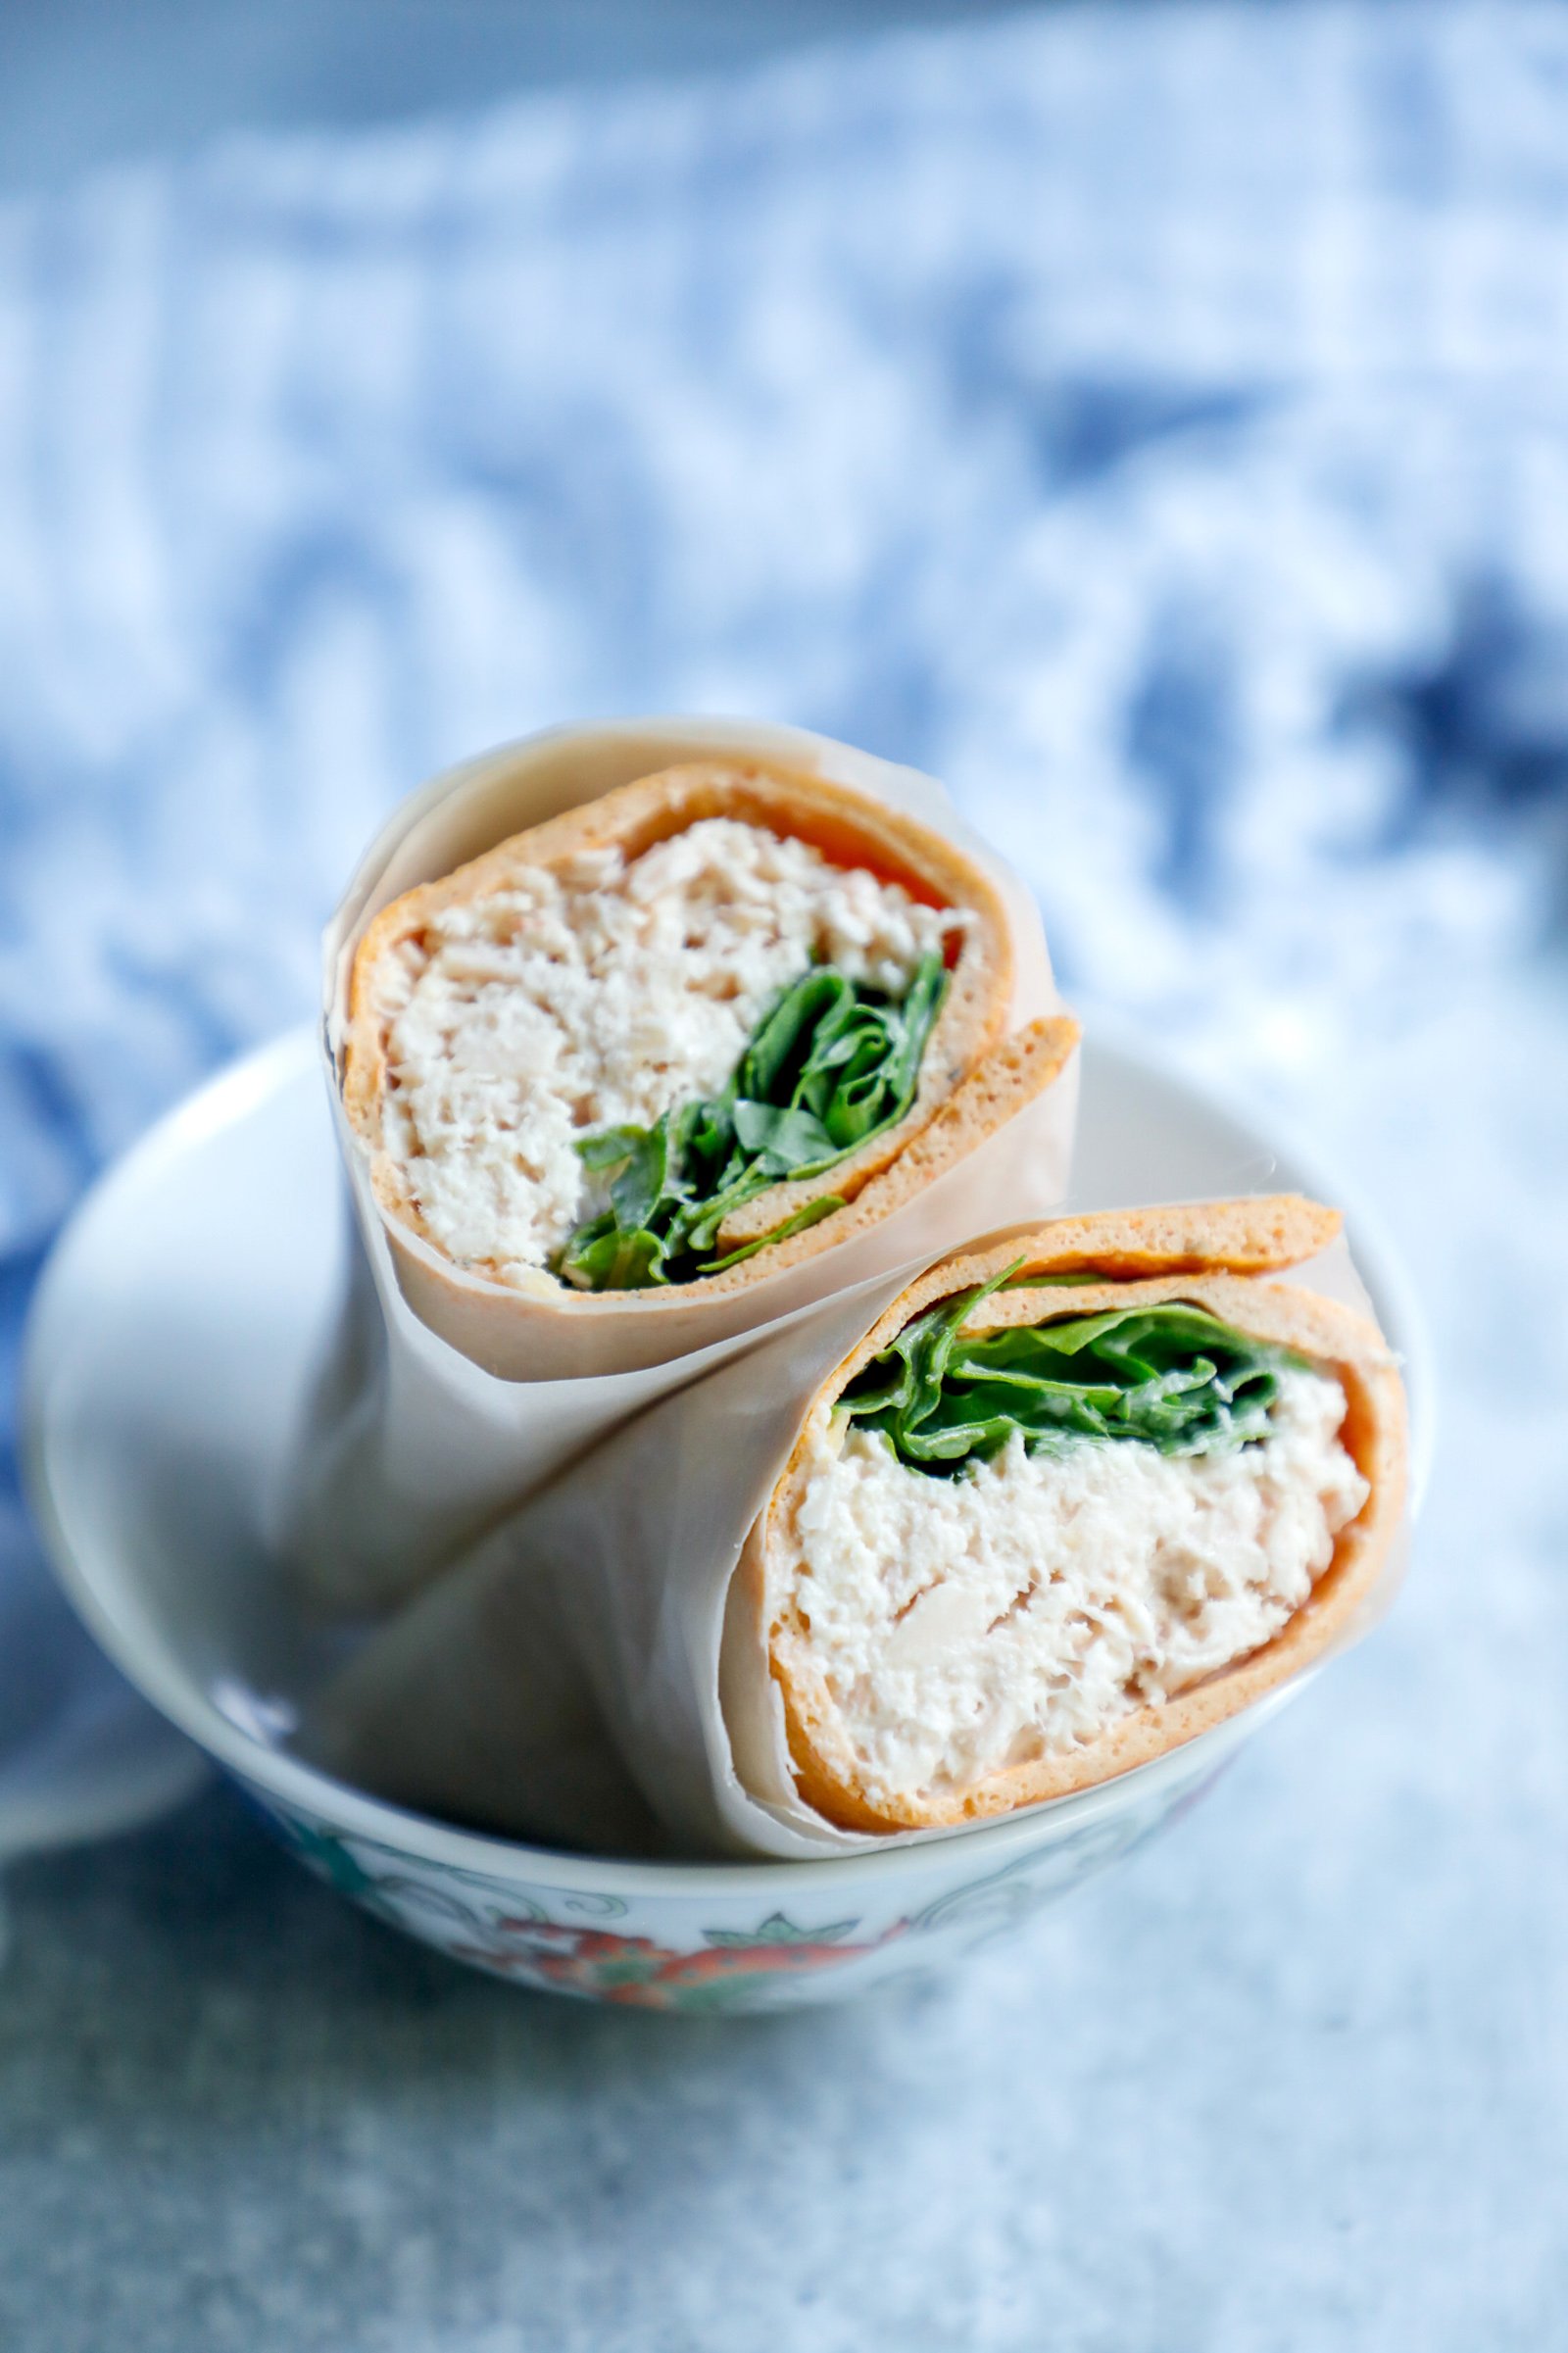 Keto Sandwich wrap used to make a tuna salad wrap with arugula and wrapped in parchment paper to hold it all together.